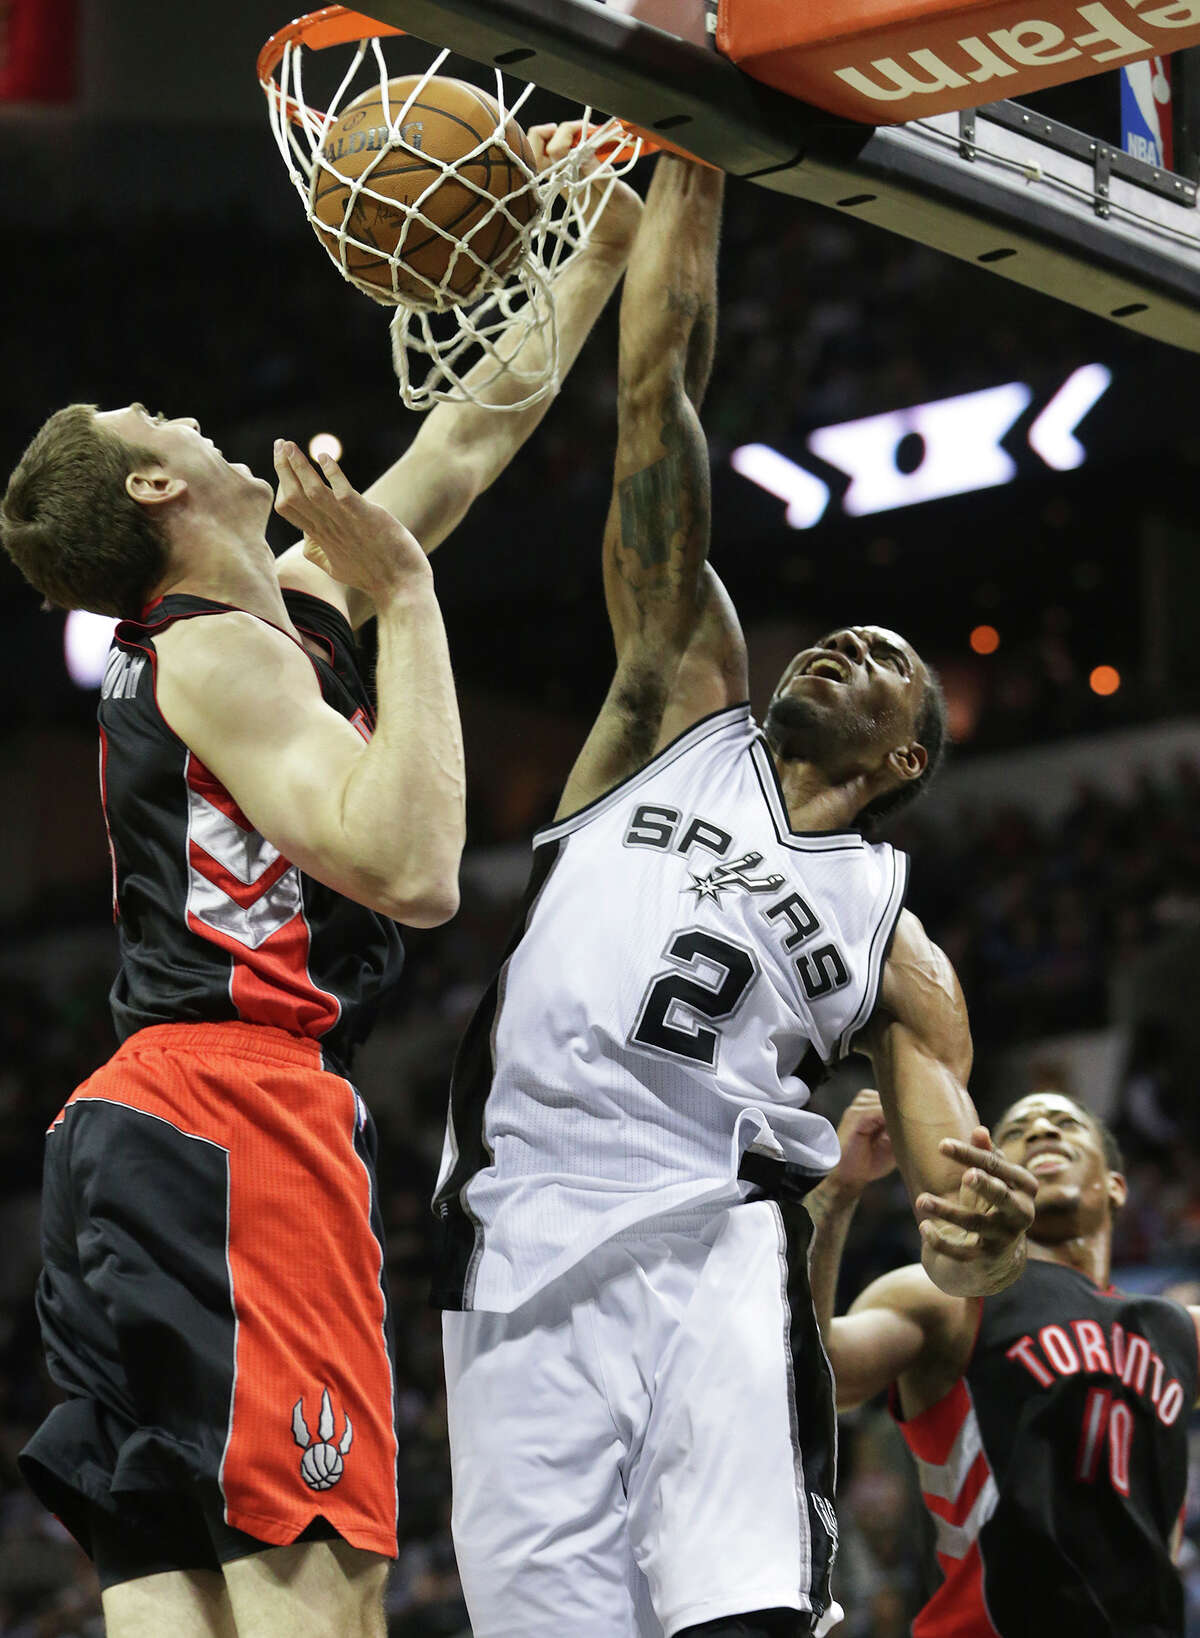 Kawhi Leonard jams a shot down against Tyler Hansbrough in the second half as the Spurs host the Toronto Raptors at the AT&T Center on March 10, 2015.